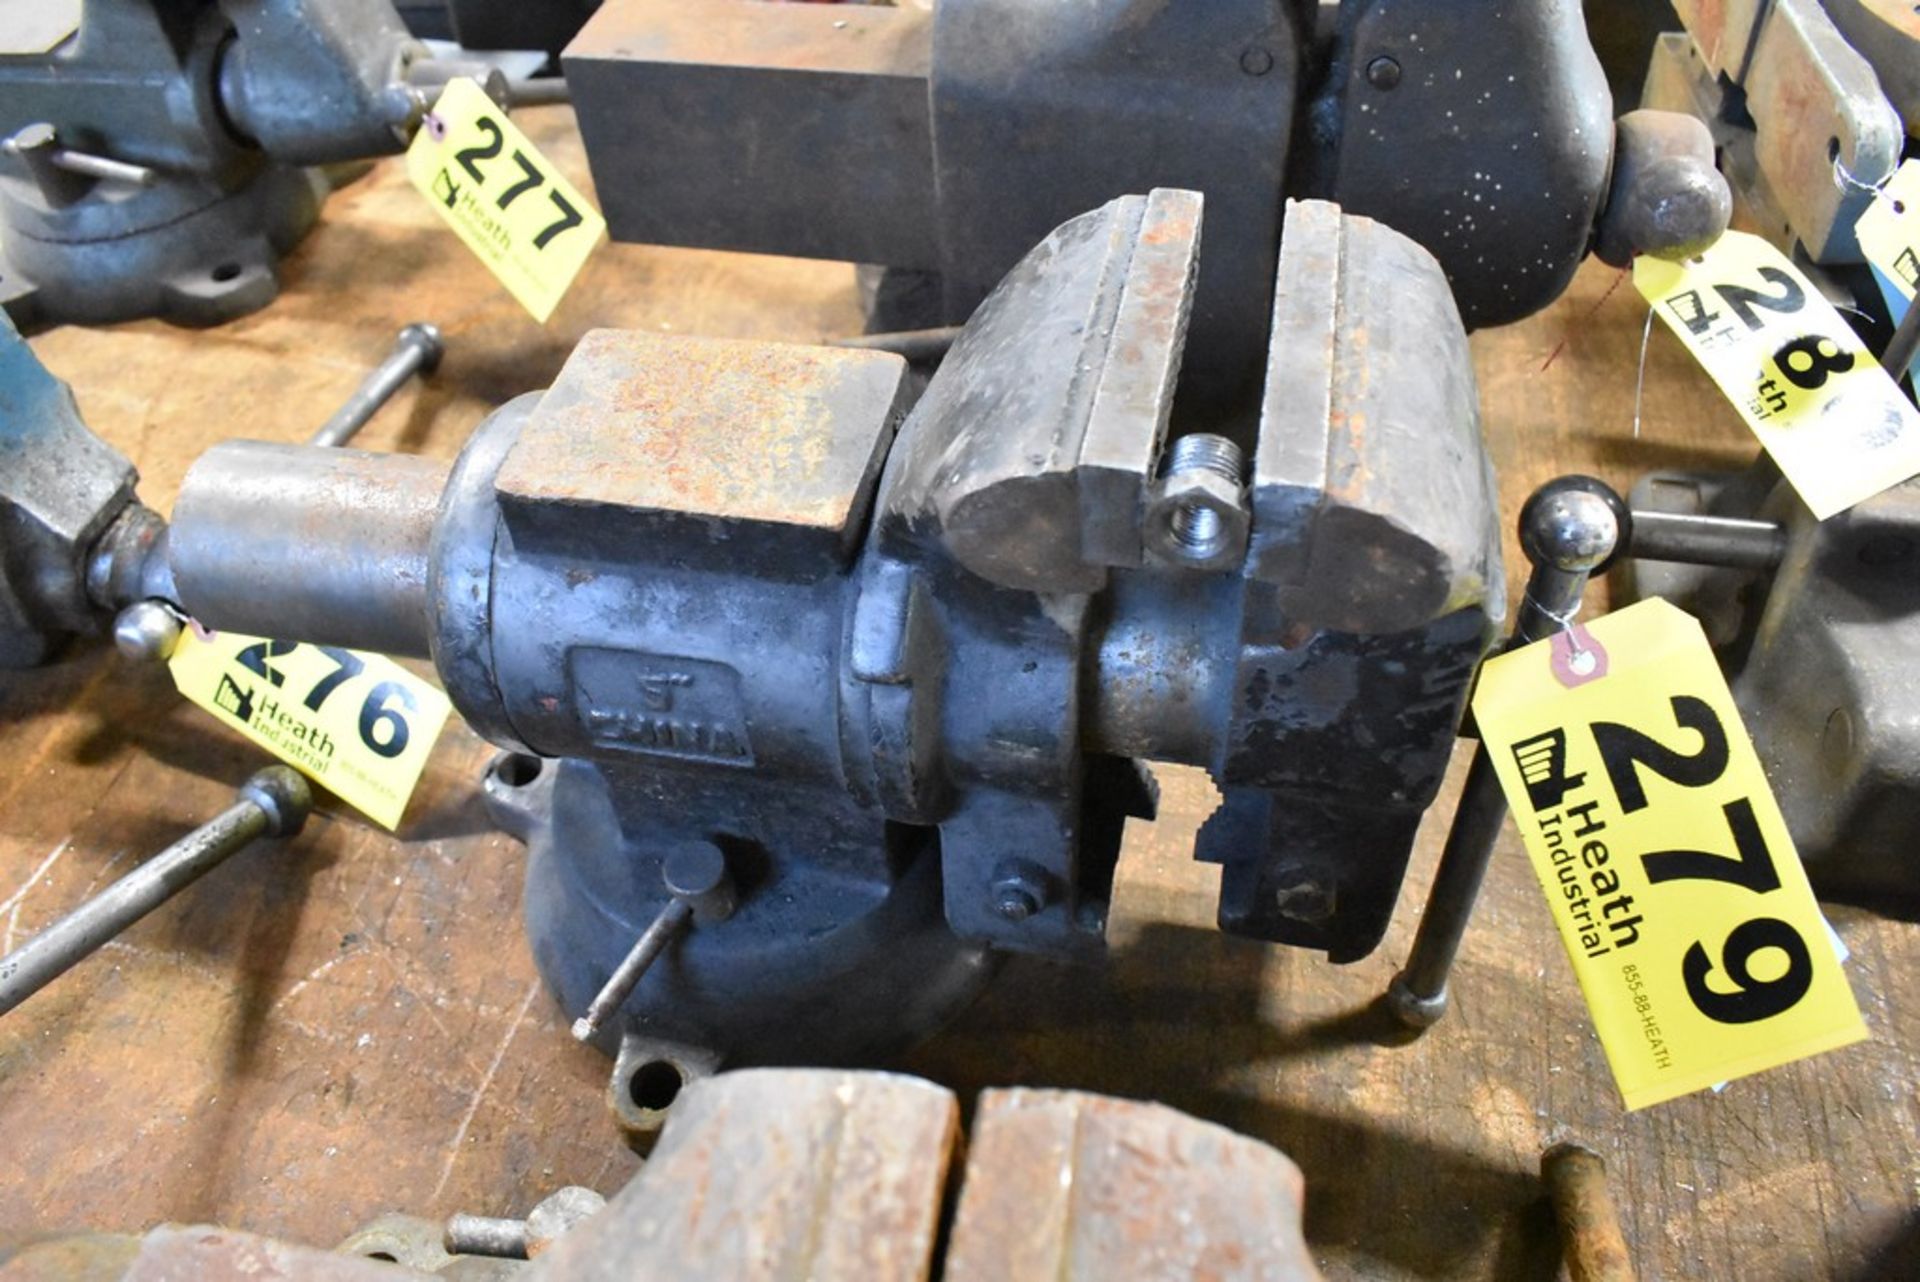 5" SWIVEL BENCH AND PIPE VISE